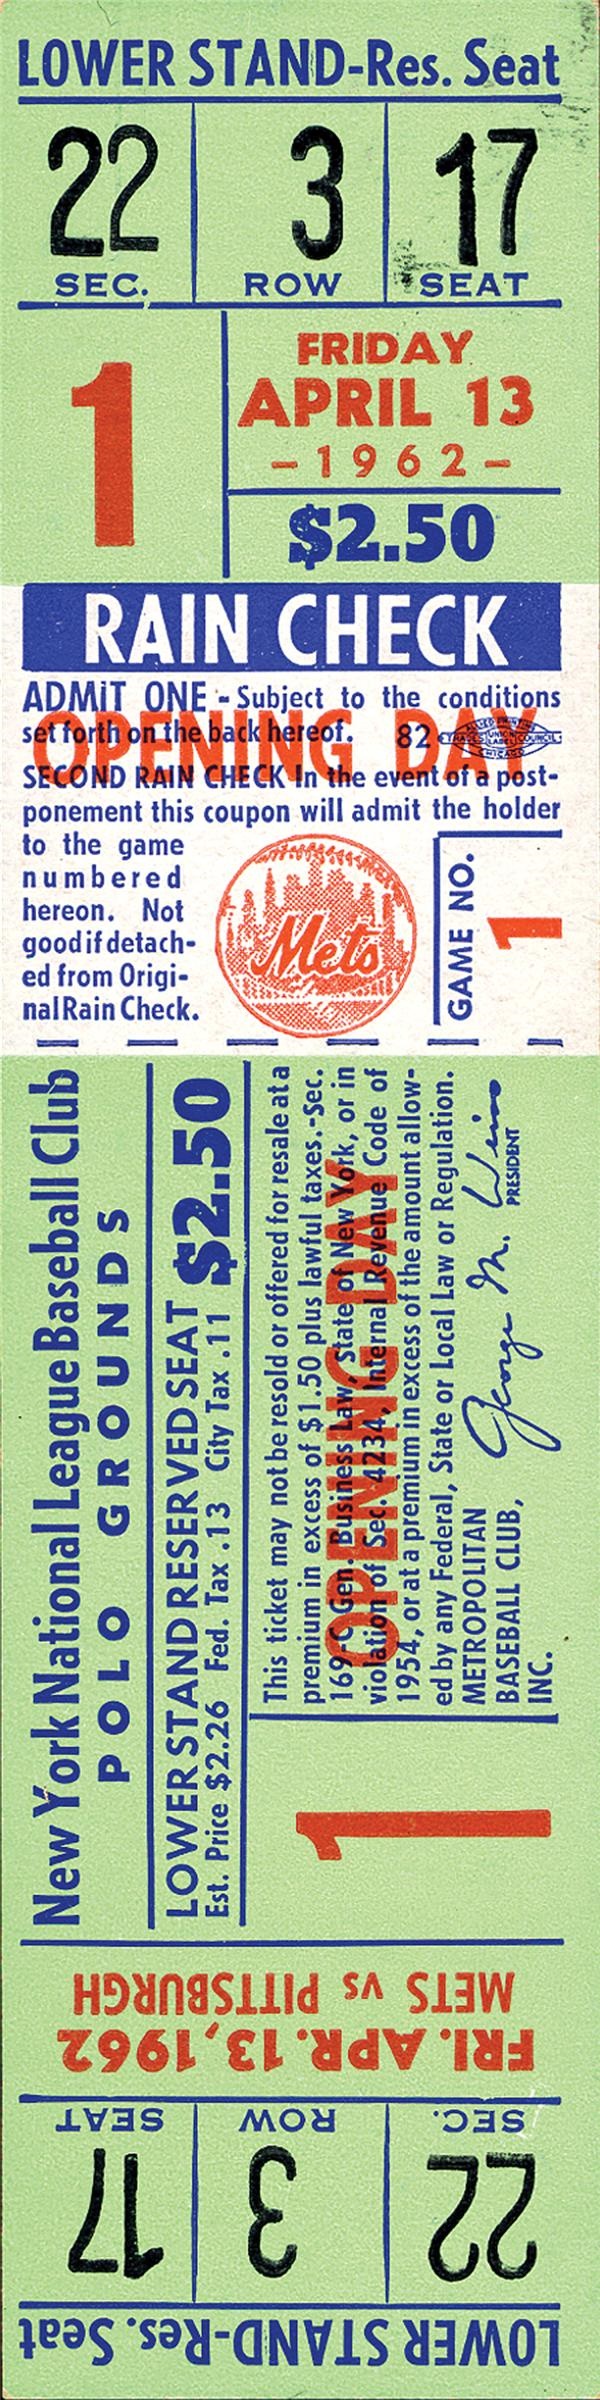 Ernie Davis - April 13, 1962 New York Mets First Home Game Full Ticket